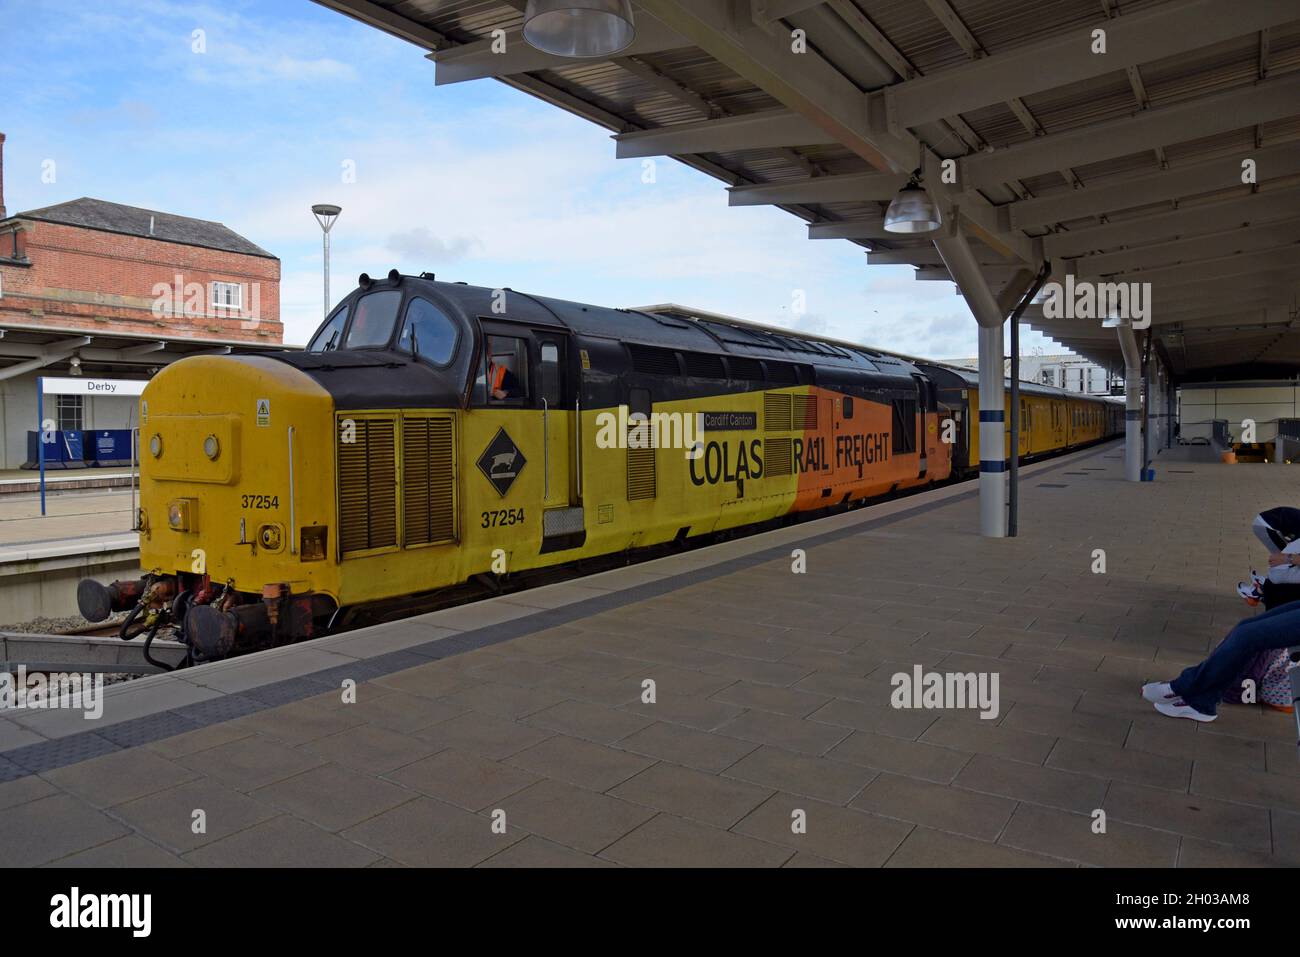 A Colas Railfreight Class 37 diesel locomotive hauling a Network Rail test & measurement train at Derby Station, August 2021 Stock Photo